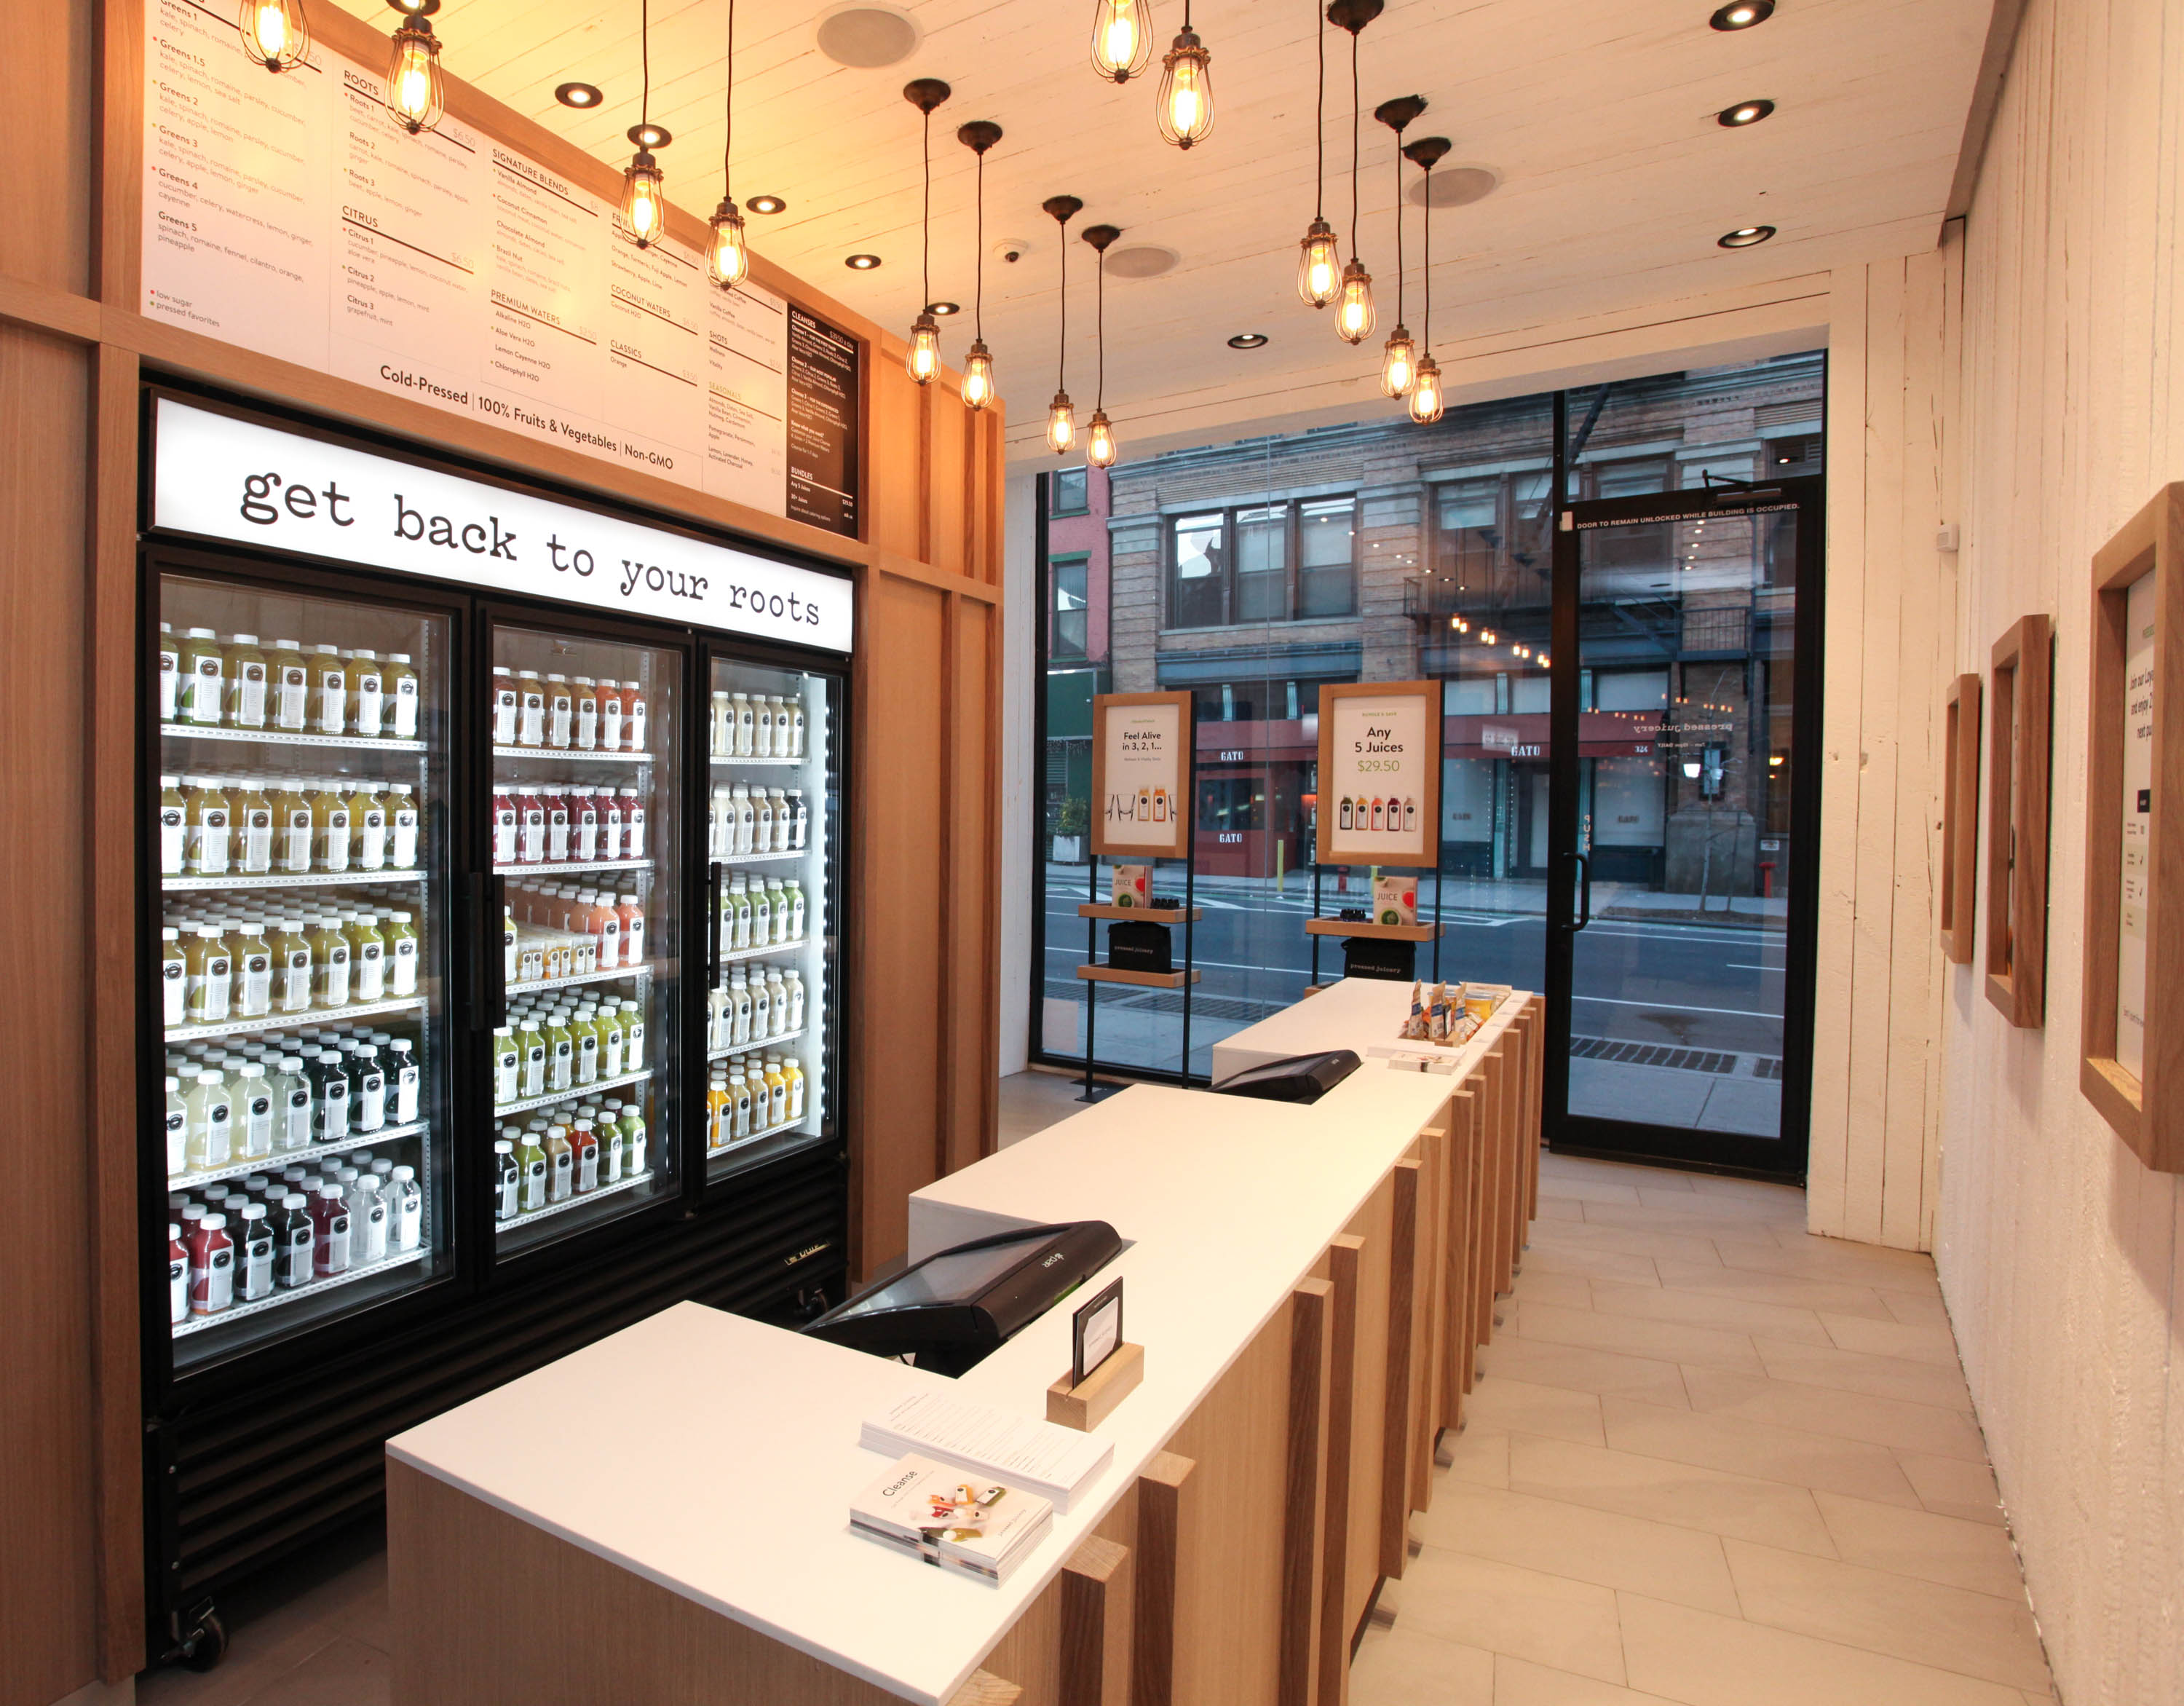 NEW YORK, NY - NOVEMBER 04: Pressed Juicery NYC Store Interiors at Pressed Juicery on November 4, 2015 in New York City. (Photo by Donald Bowers/Getty Images for Pressed Juicery)